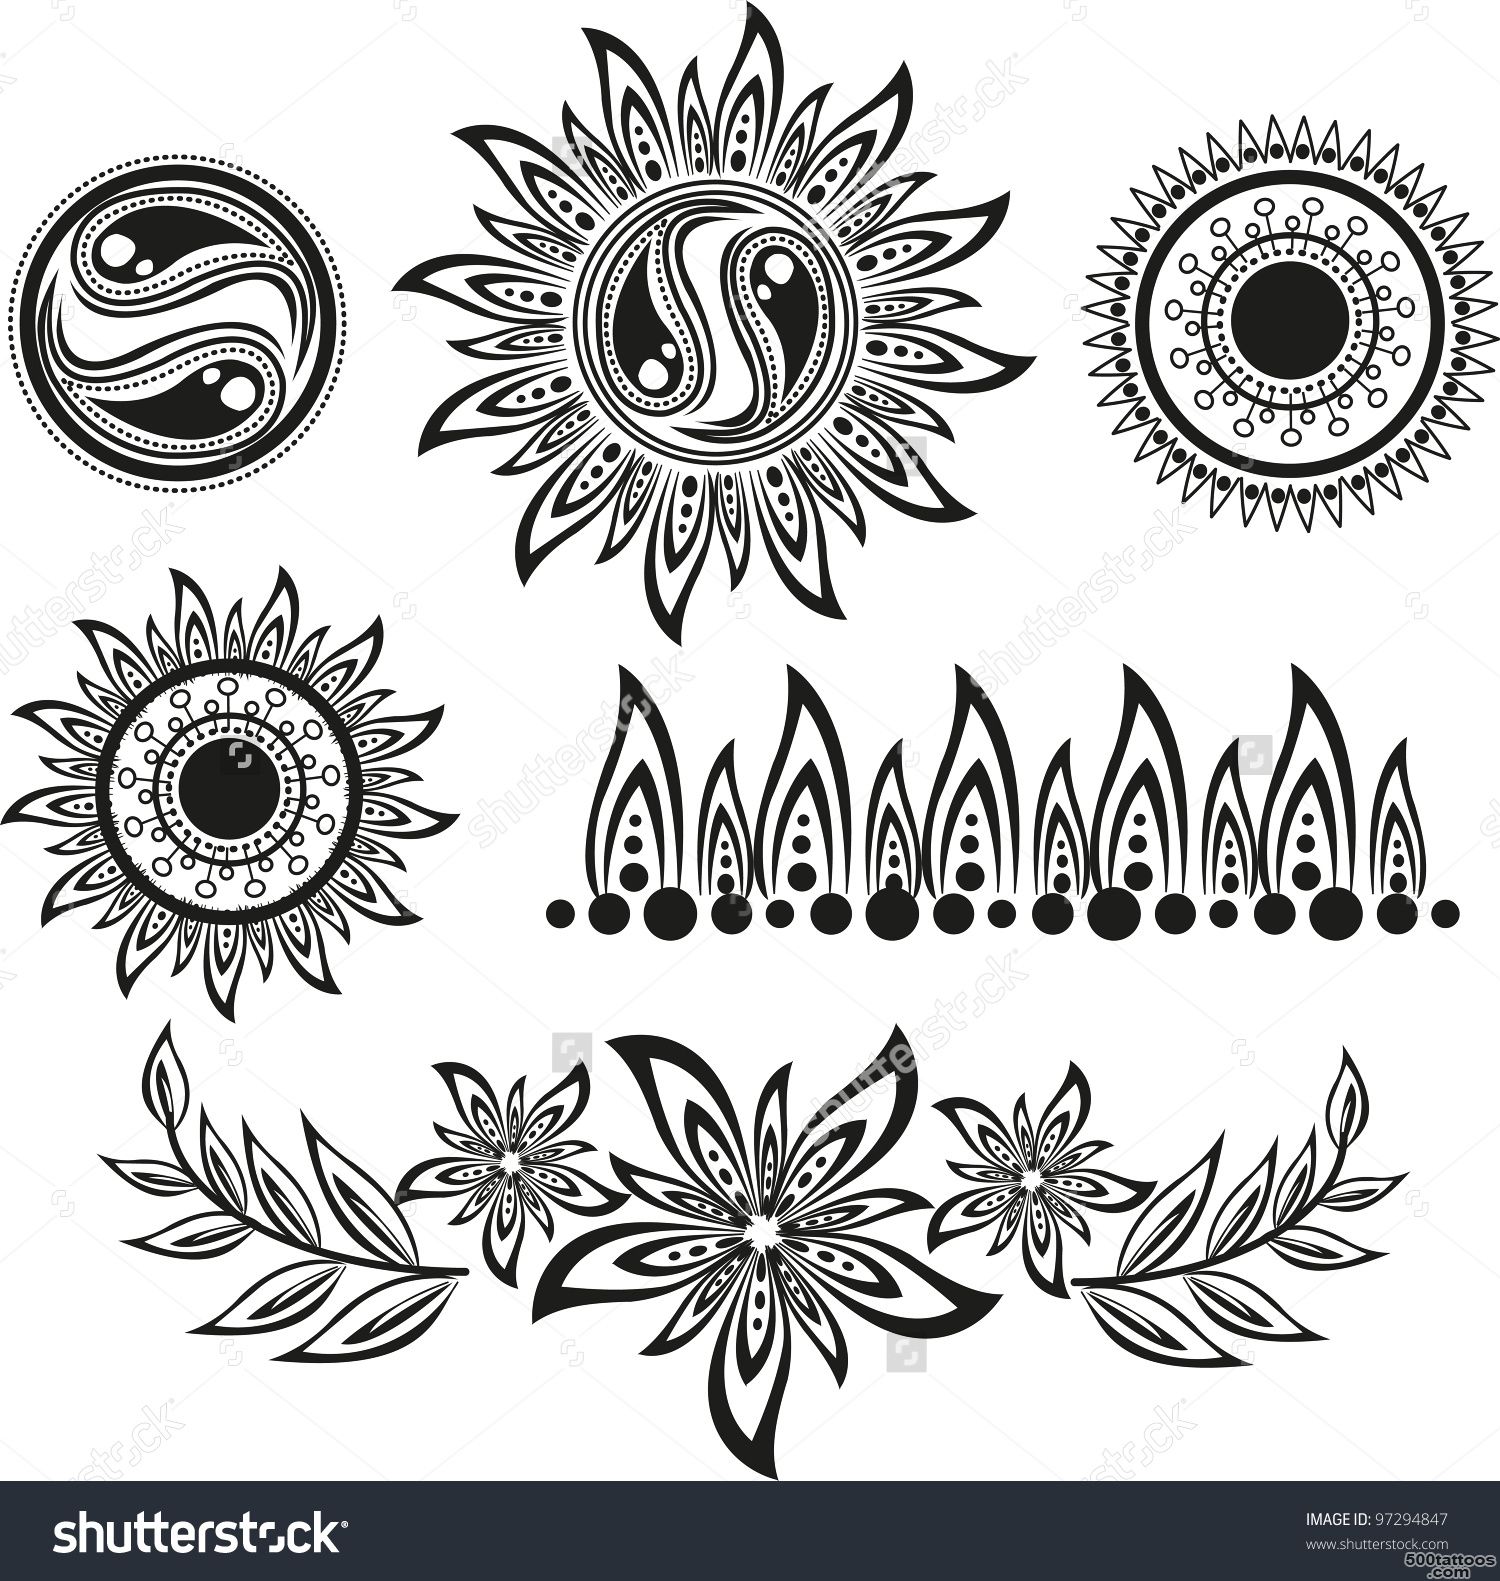 Set Ethnic Tattoos With Floral Elements Stock Photo 97294847 ..._16